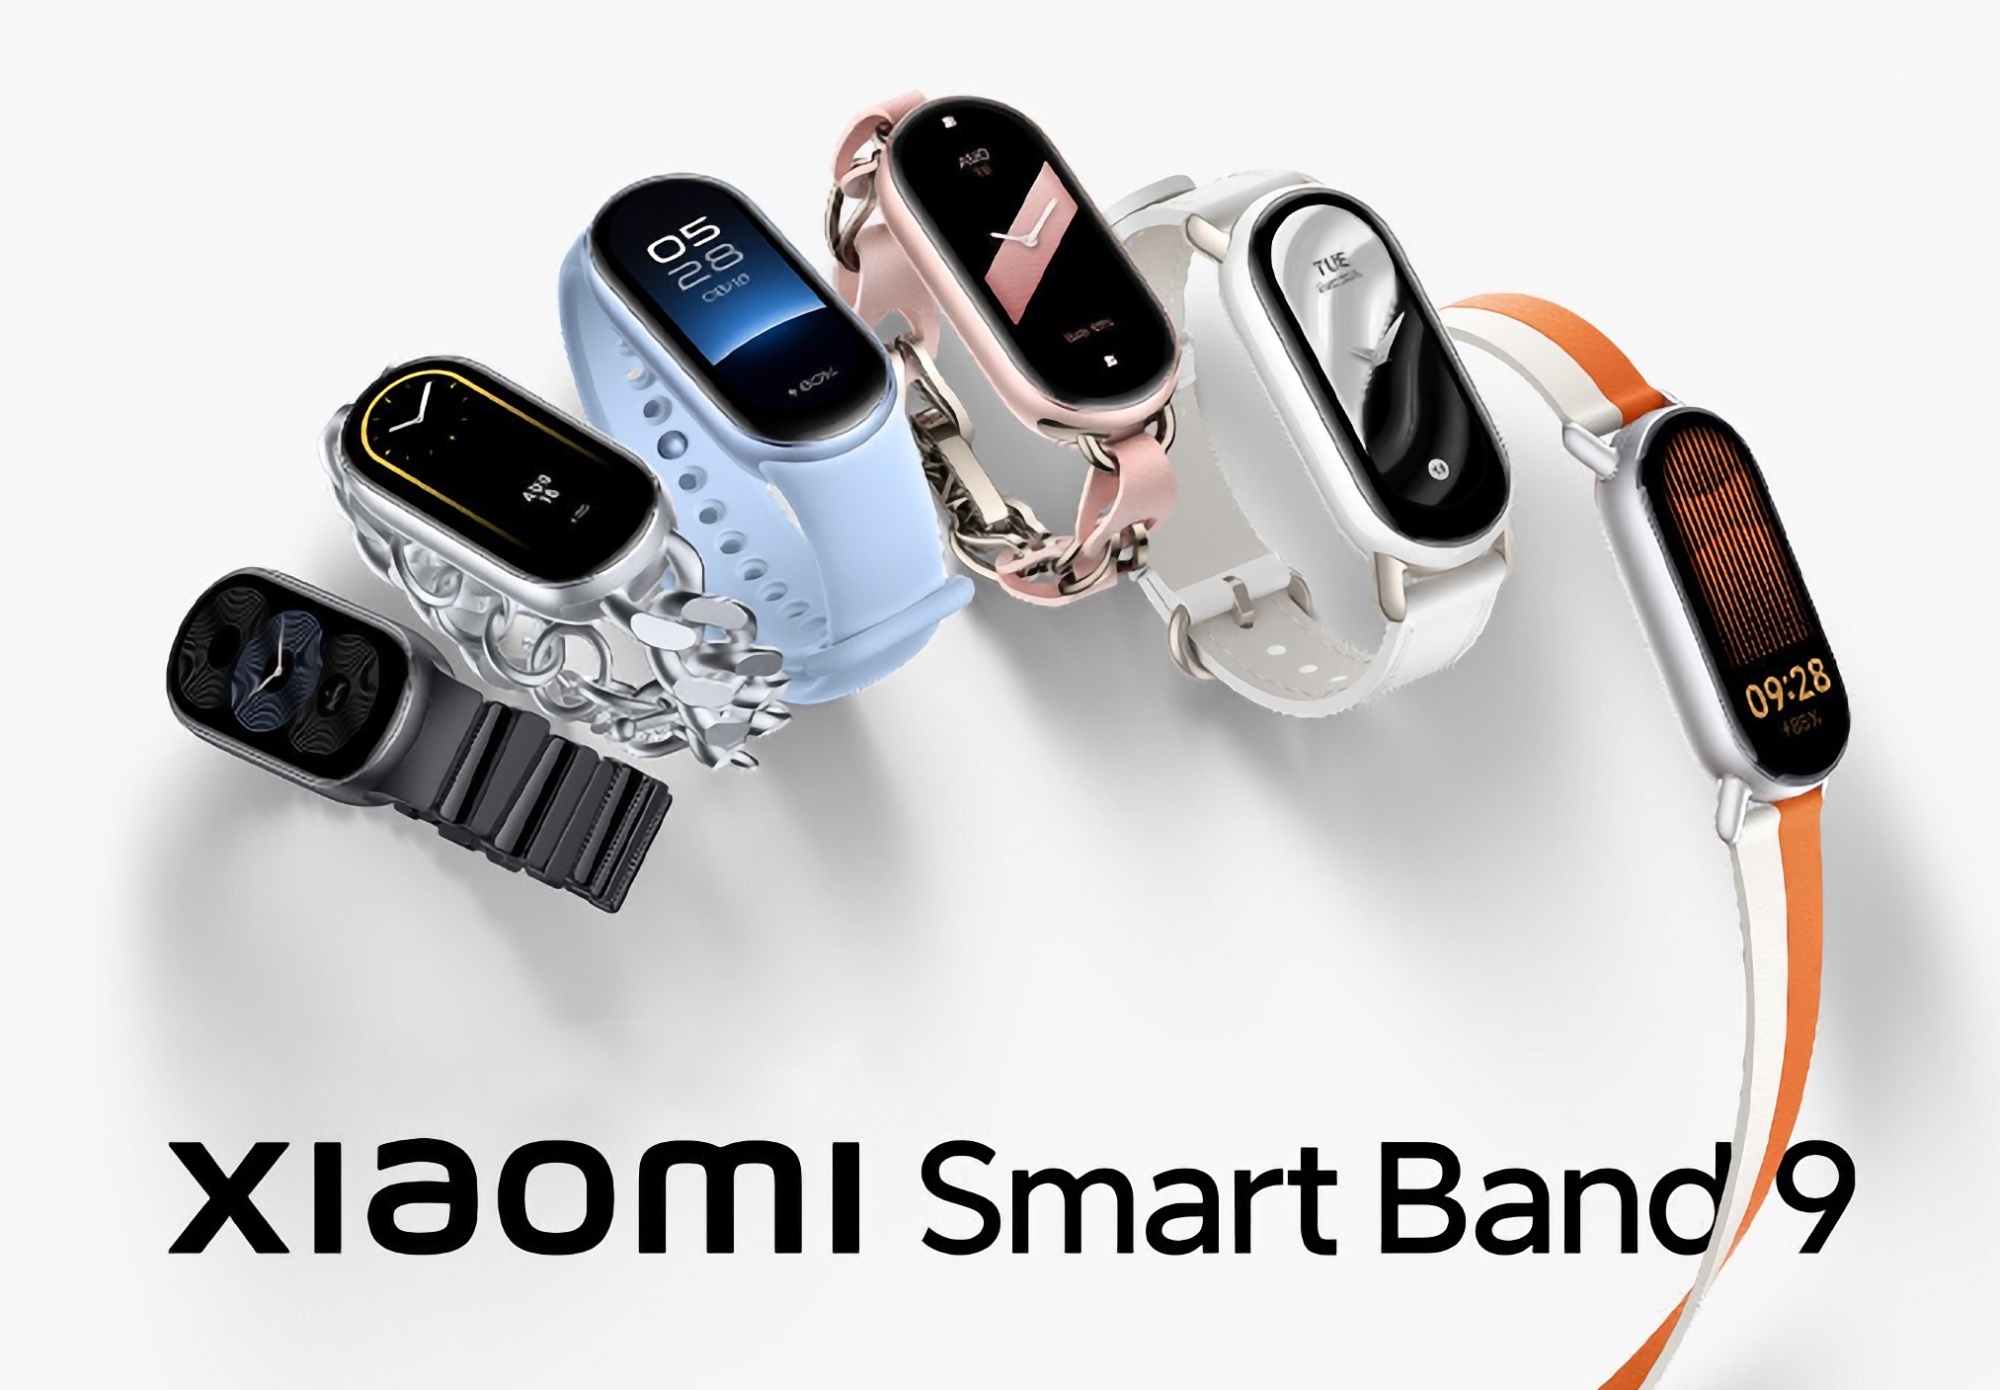 It's official: Xiaomi Smart Band 9 will debut alongside the Xiaomi MIX Fold 4 foldable smartphone